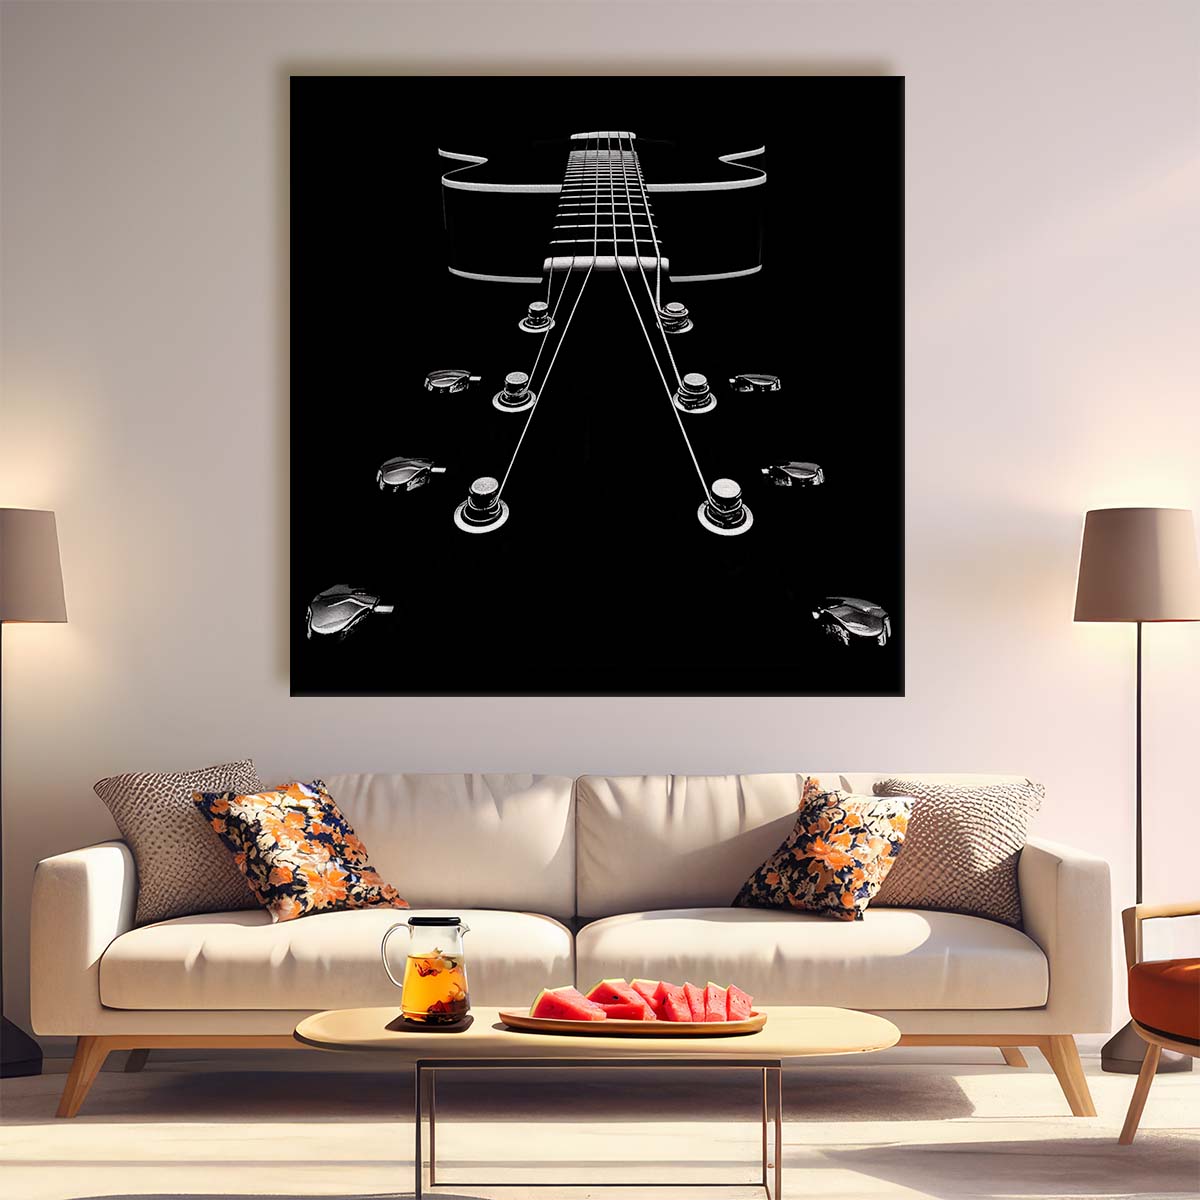 Abstract Monochrome Guitar Sharp Contrast Still Life Photography Wall Art by Luxuriance Designs. Made in USA.